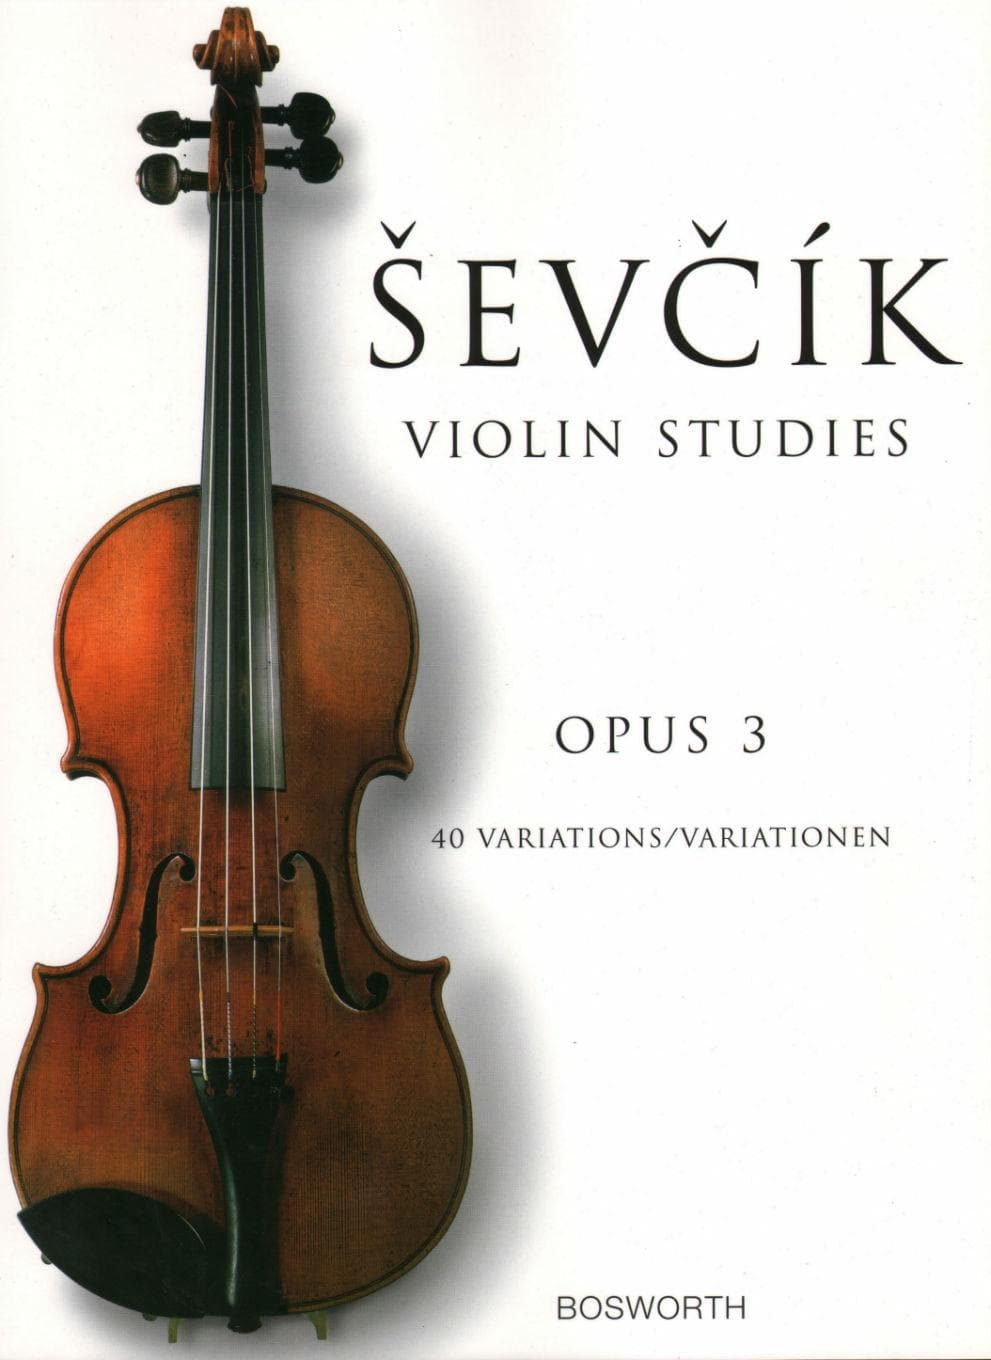 Sevcik, Otakar - 40 Variations Op 3 For Violin Published by Bosworth and Co